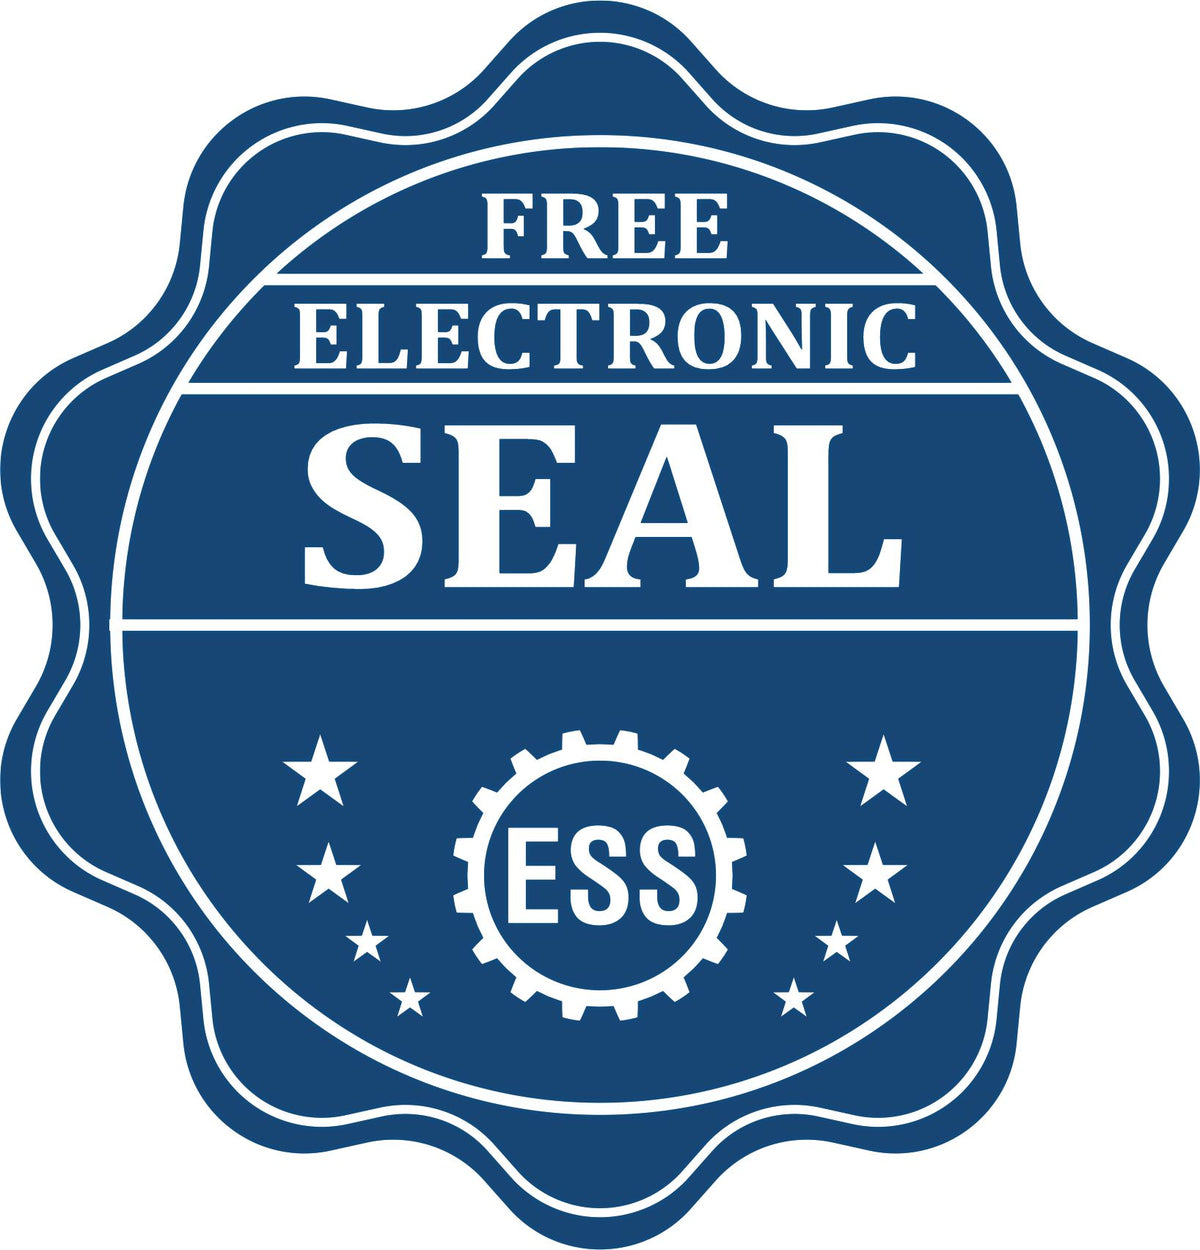 A badge showing a free electronic seal for the Self-Inking New Jersey Landscape Architect Stamp with stars and the ESS gear on the emblem.